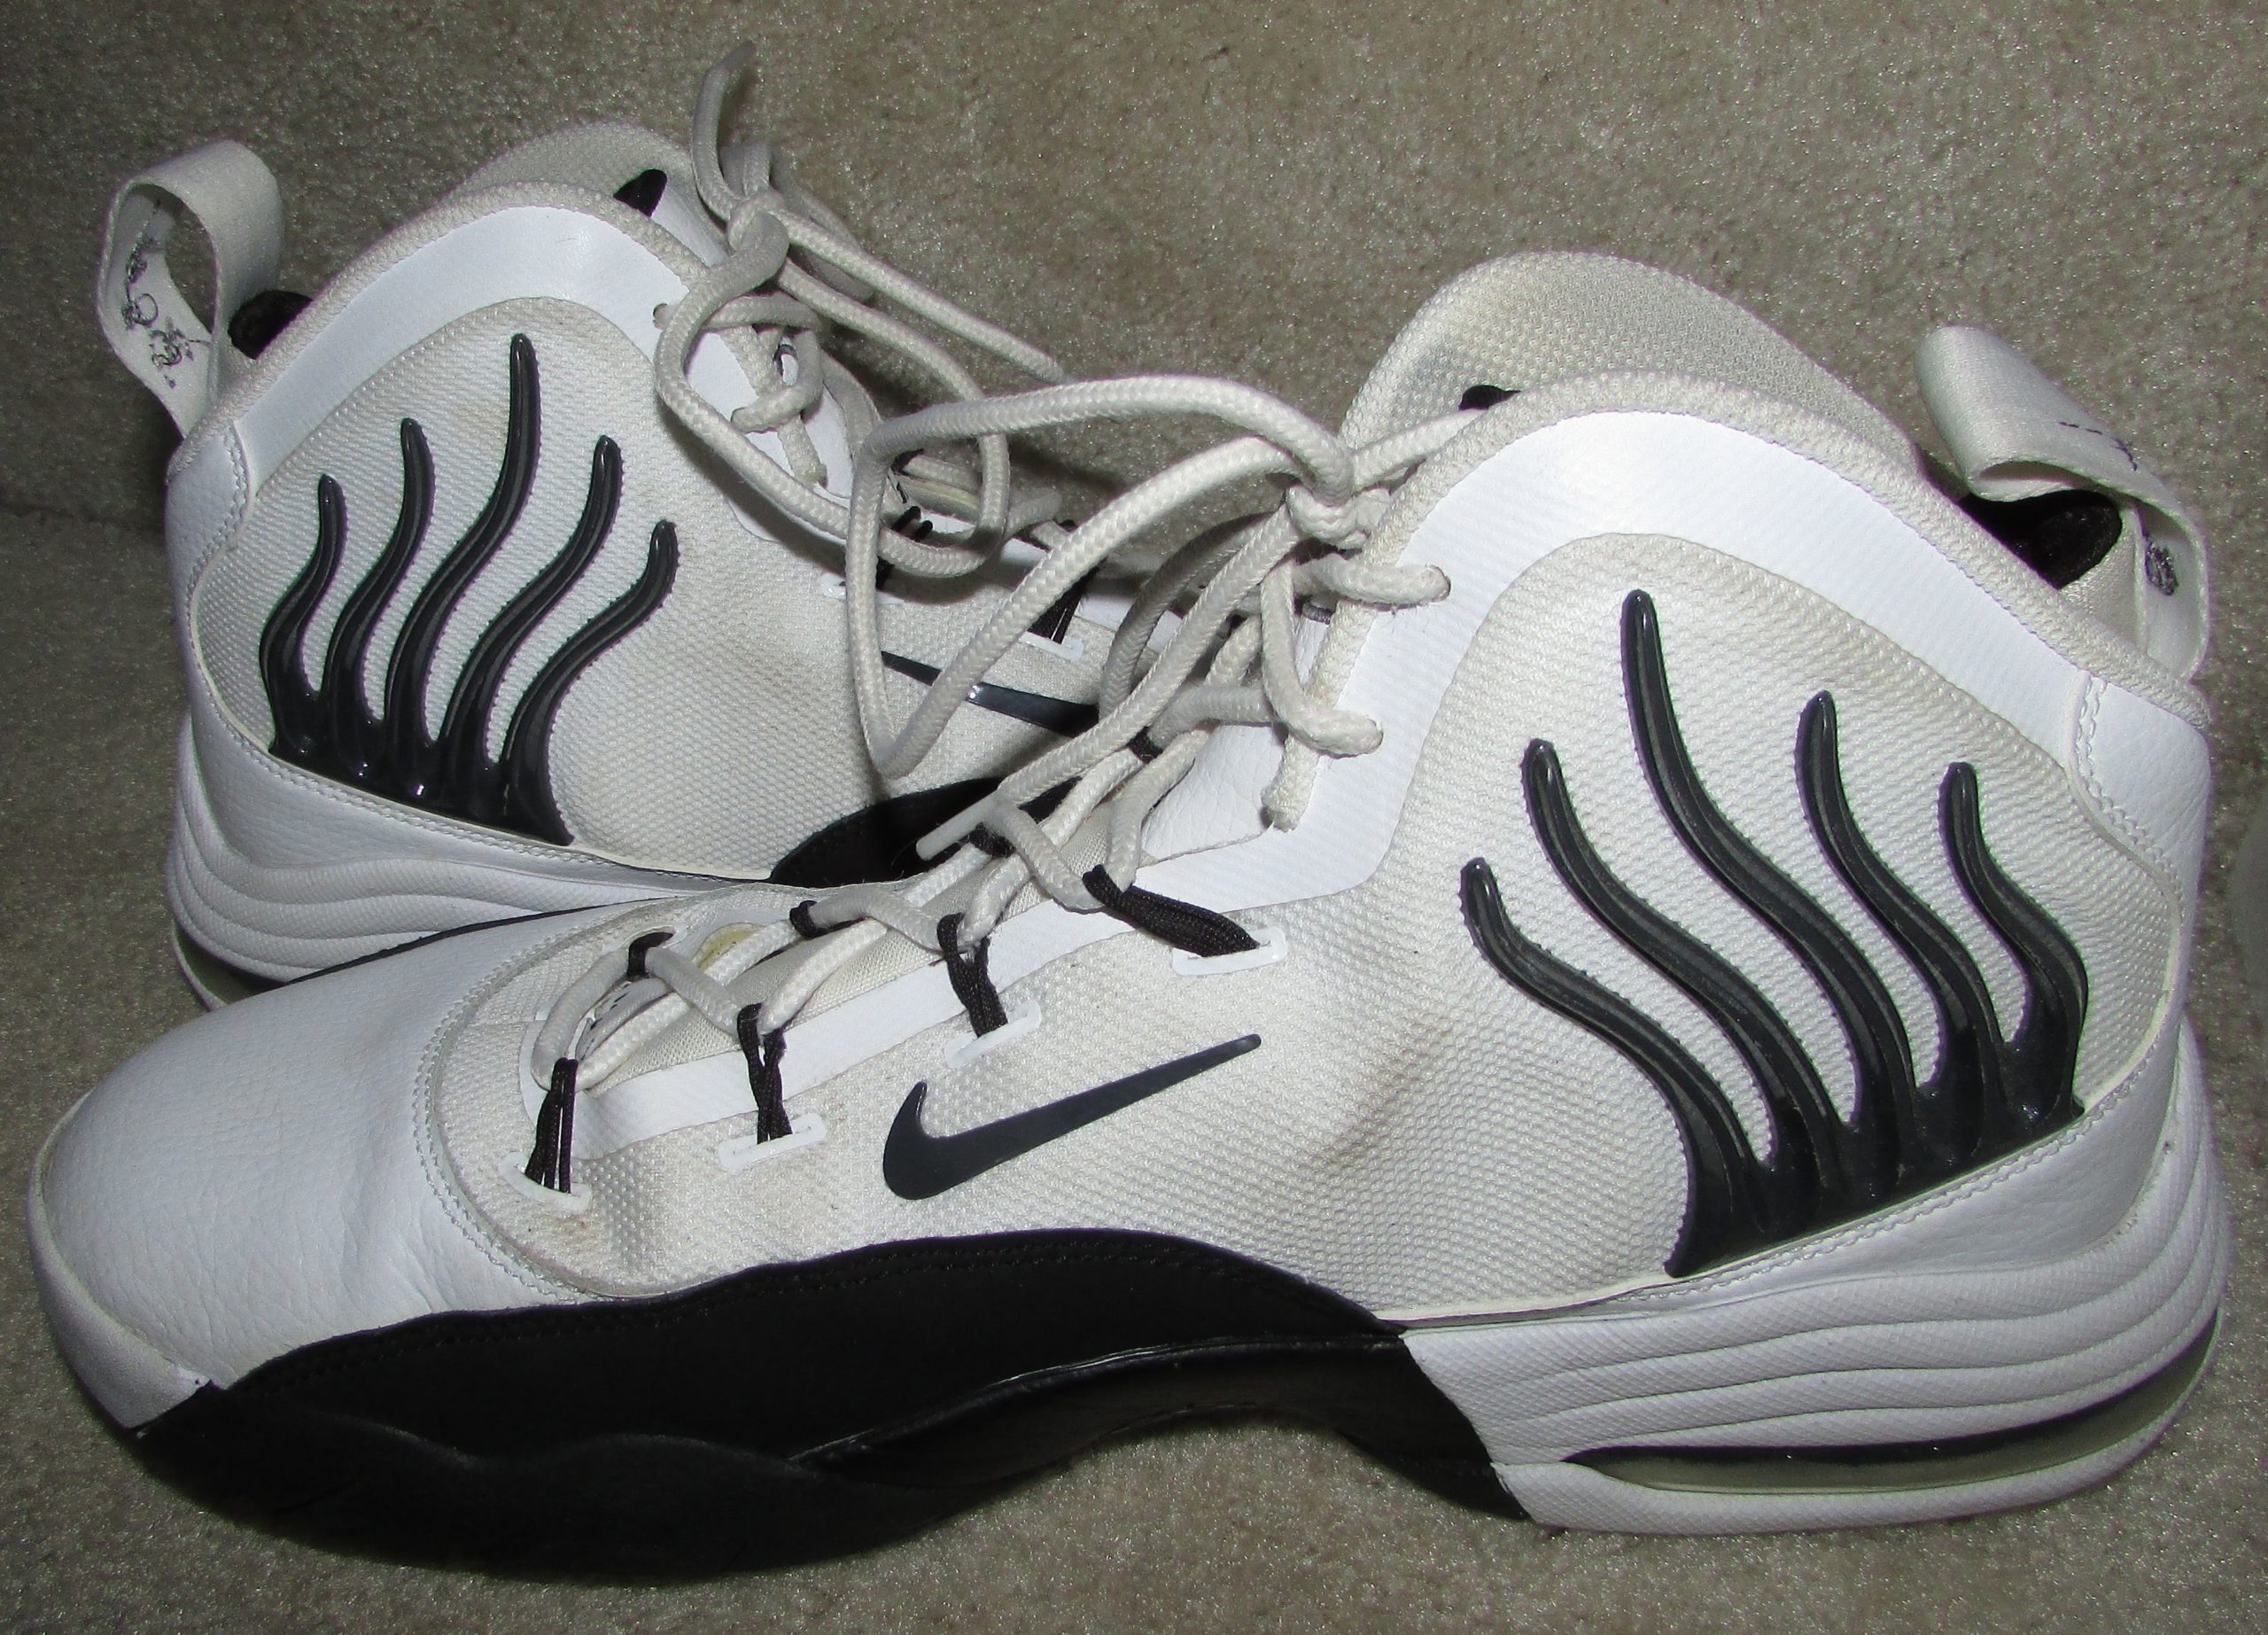 size 9 mens basketball shoes